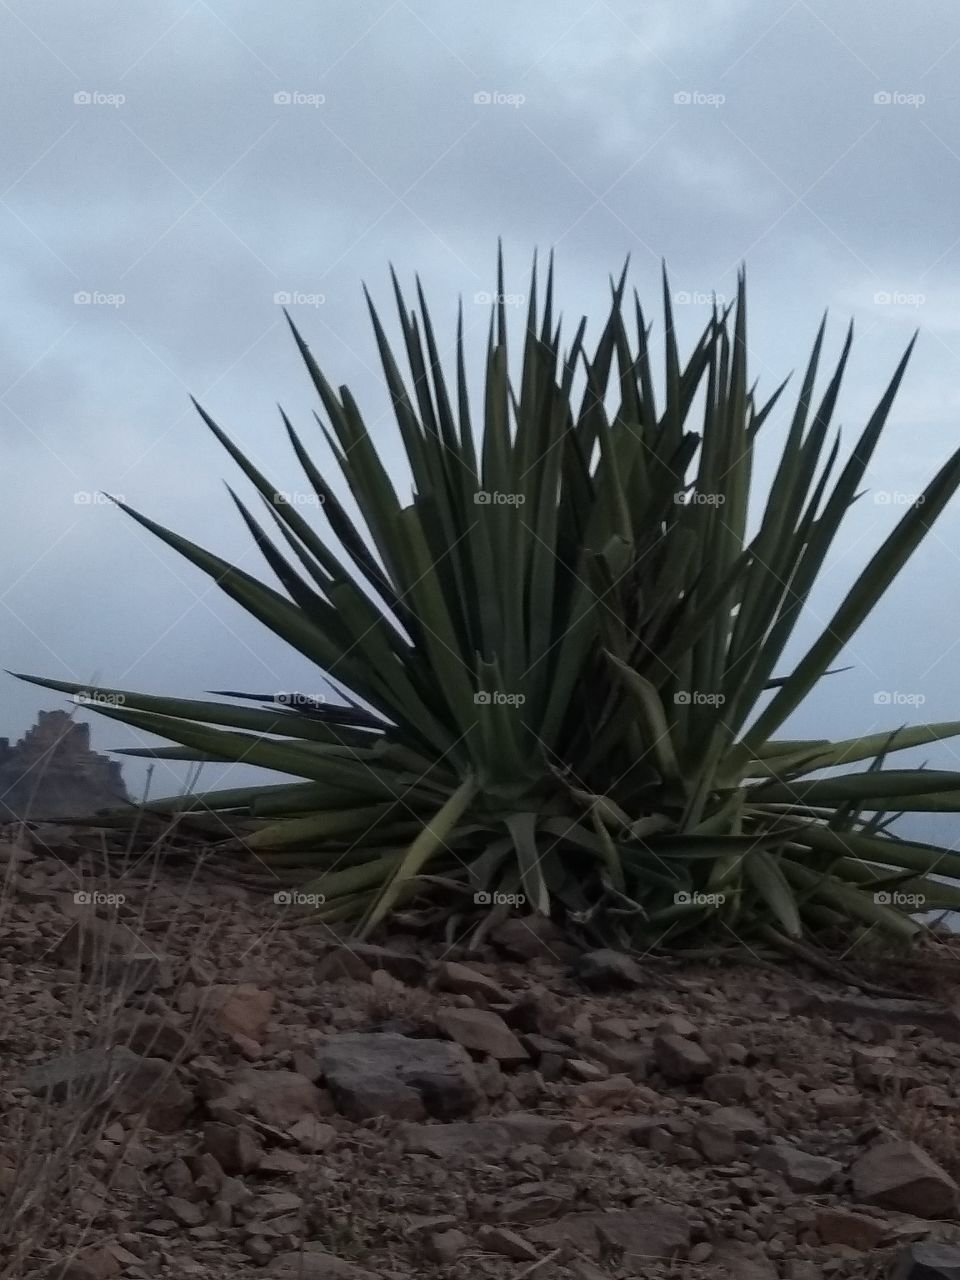 beautiful plants,looks like cactus plant at top of mountains,living single...